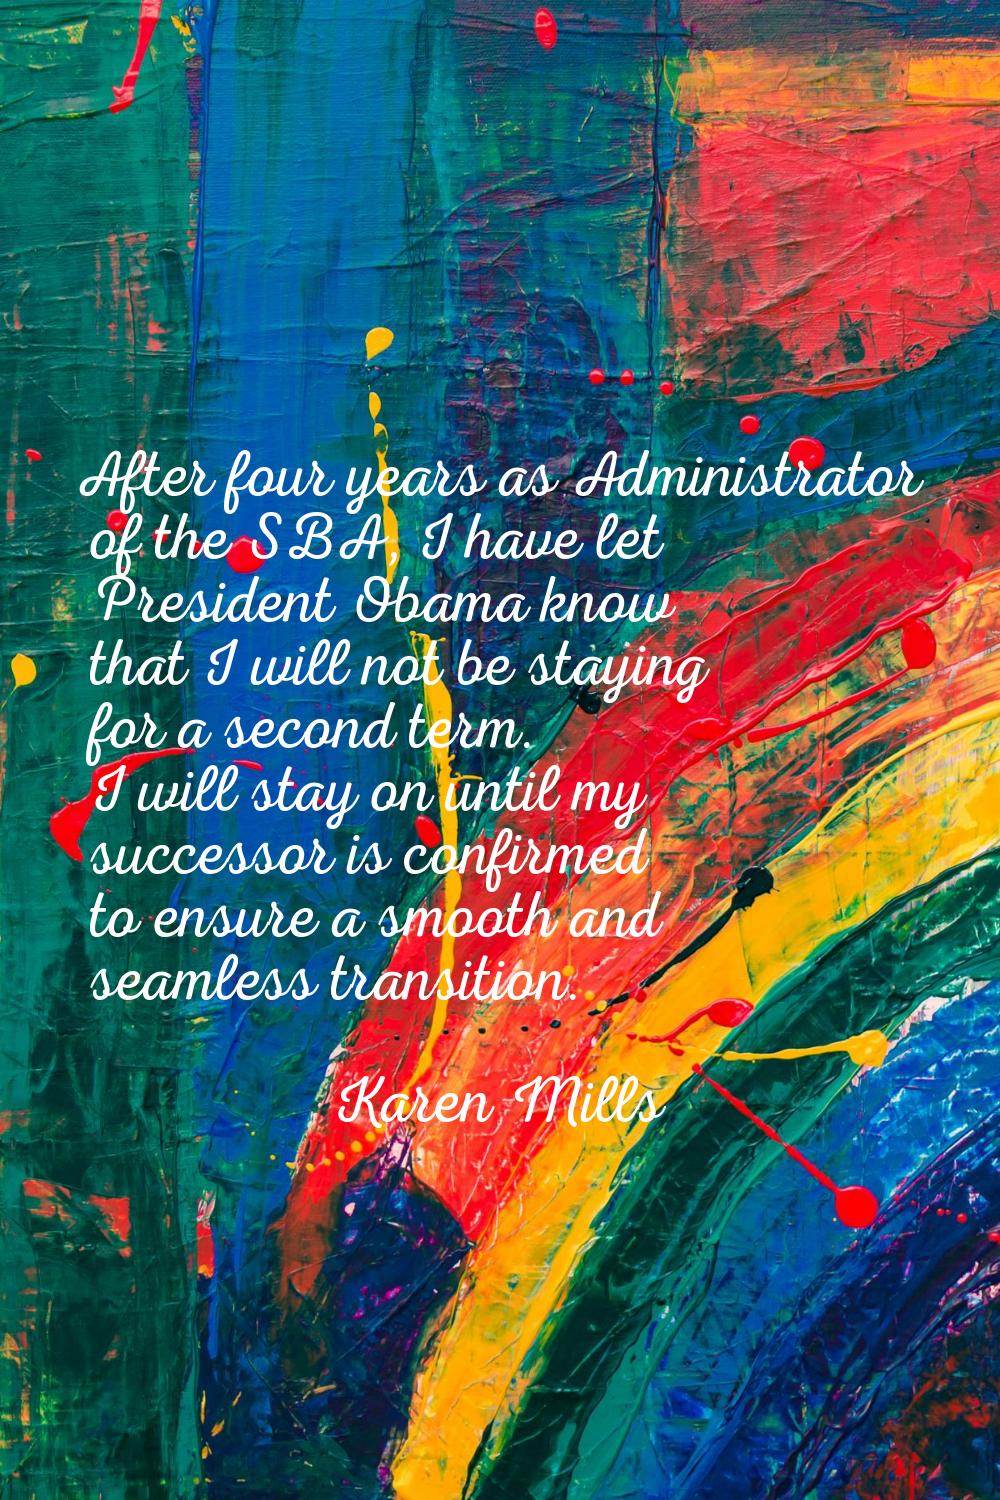 After four years as Administrator of the SBA, I have let President Obama know that I will not be st